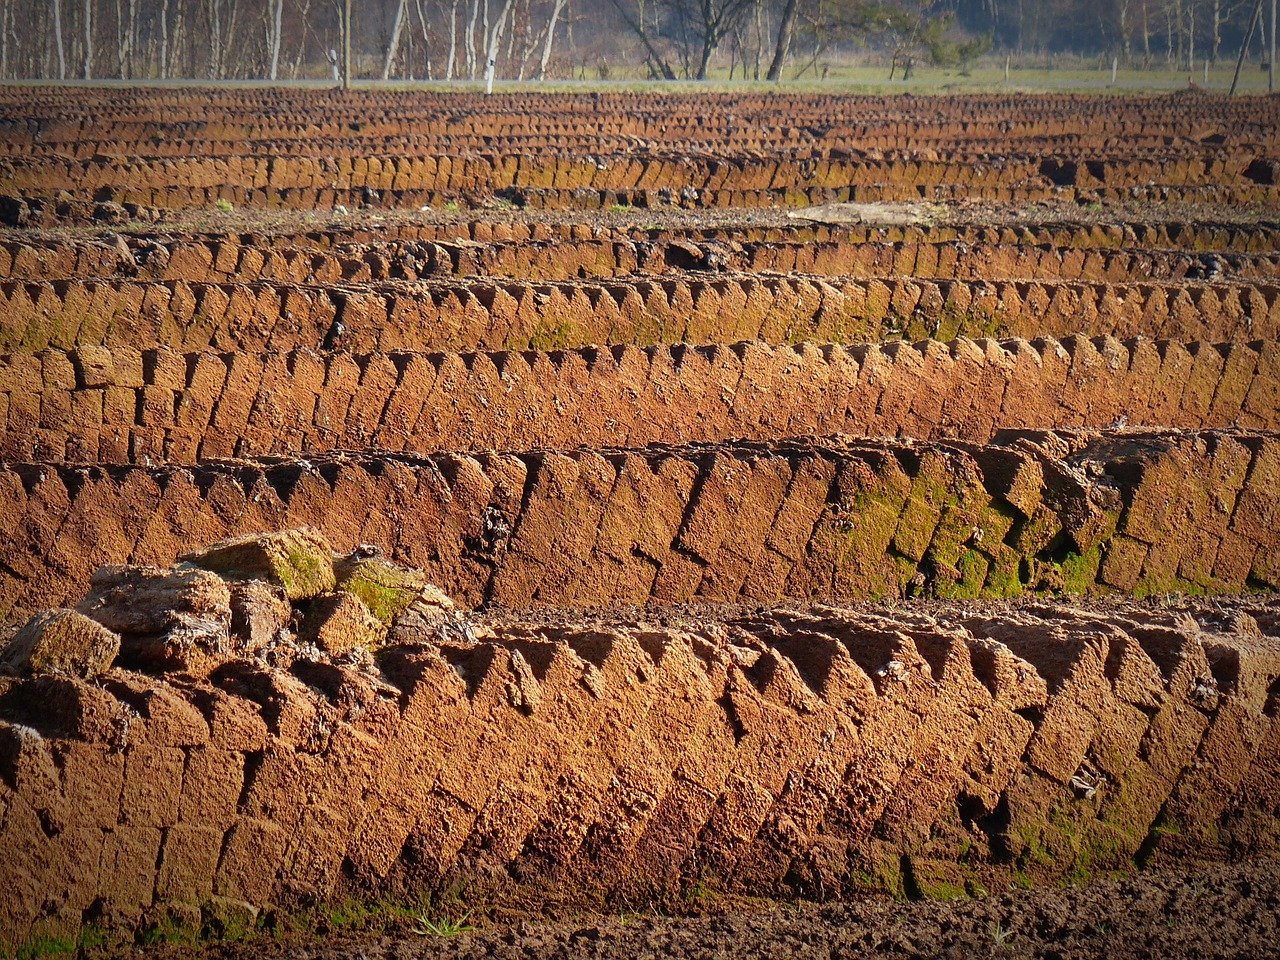 peat moss being harvested